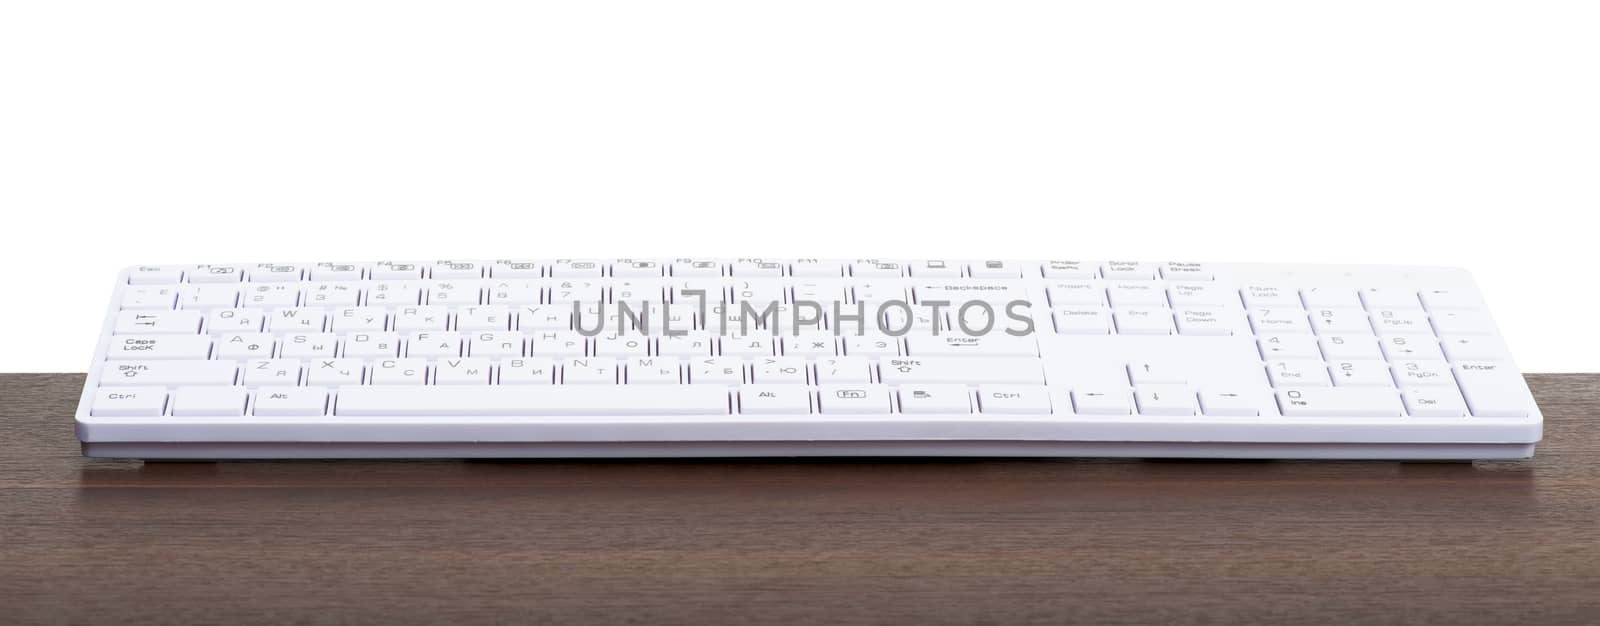 Computer keyboard on table isolated on white background